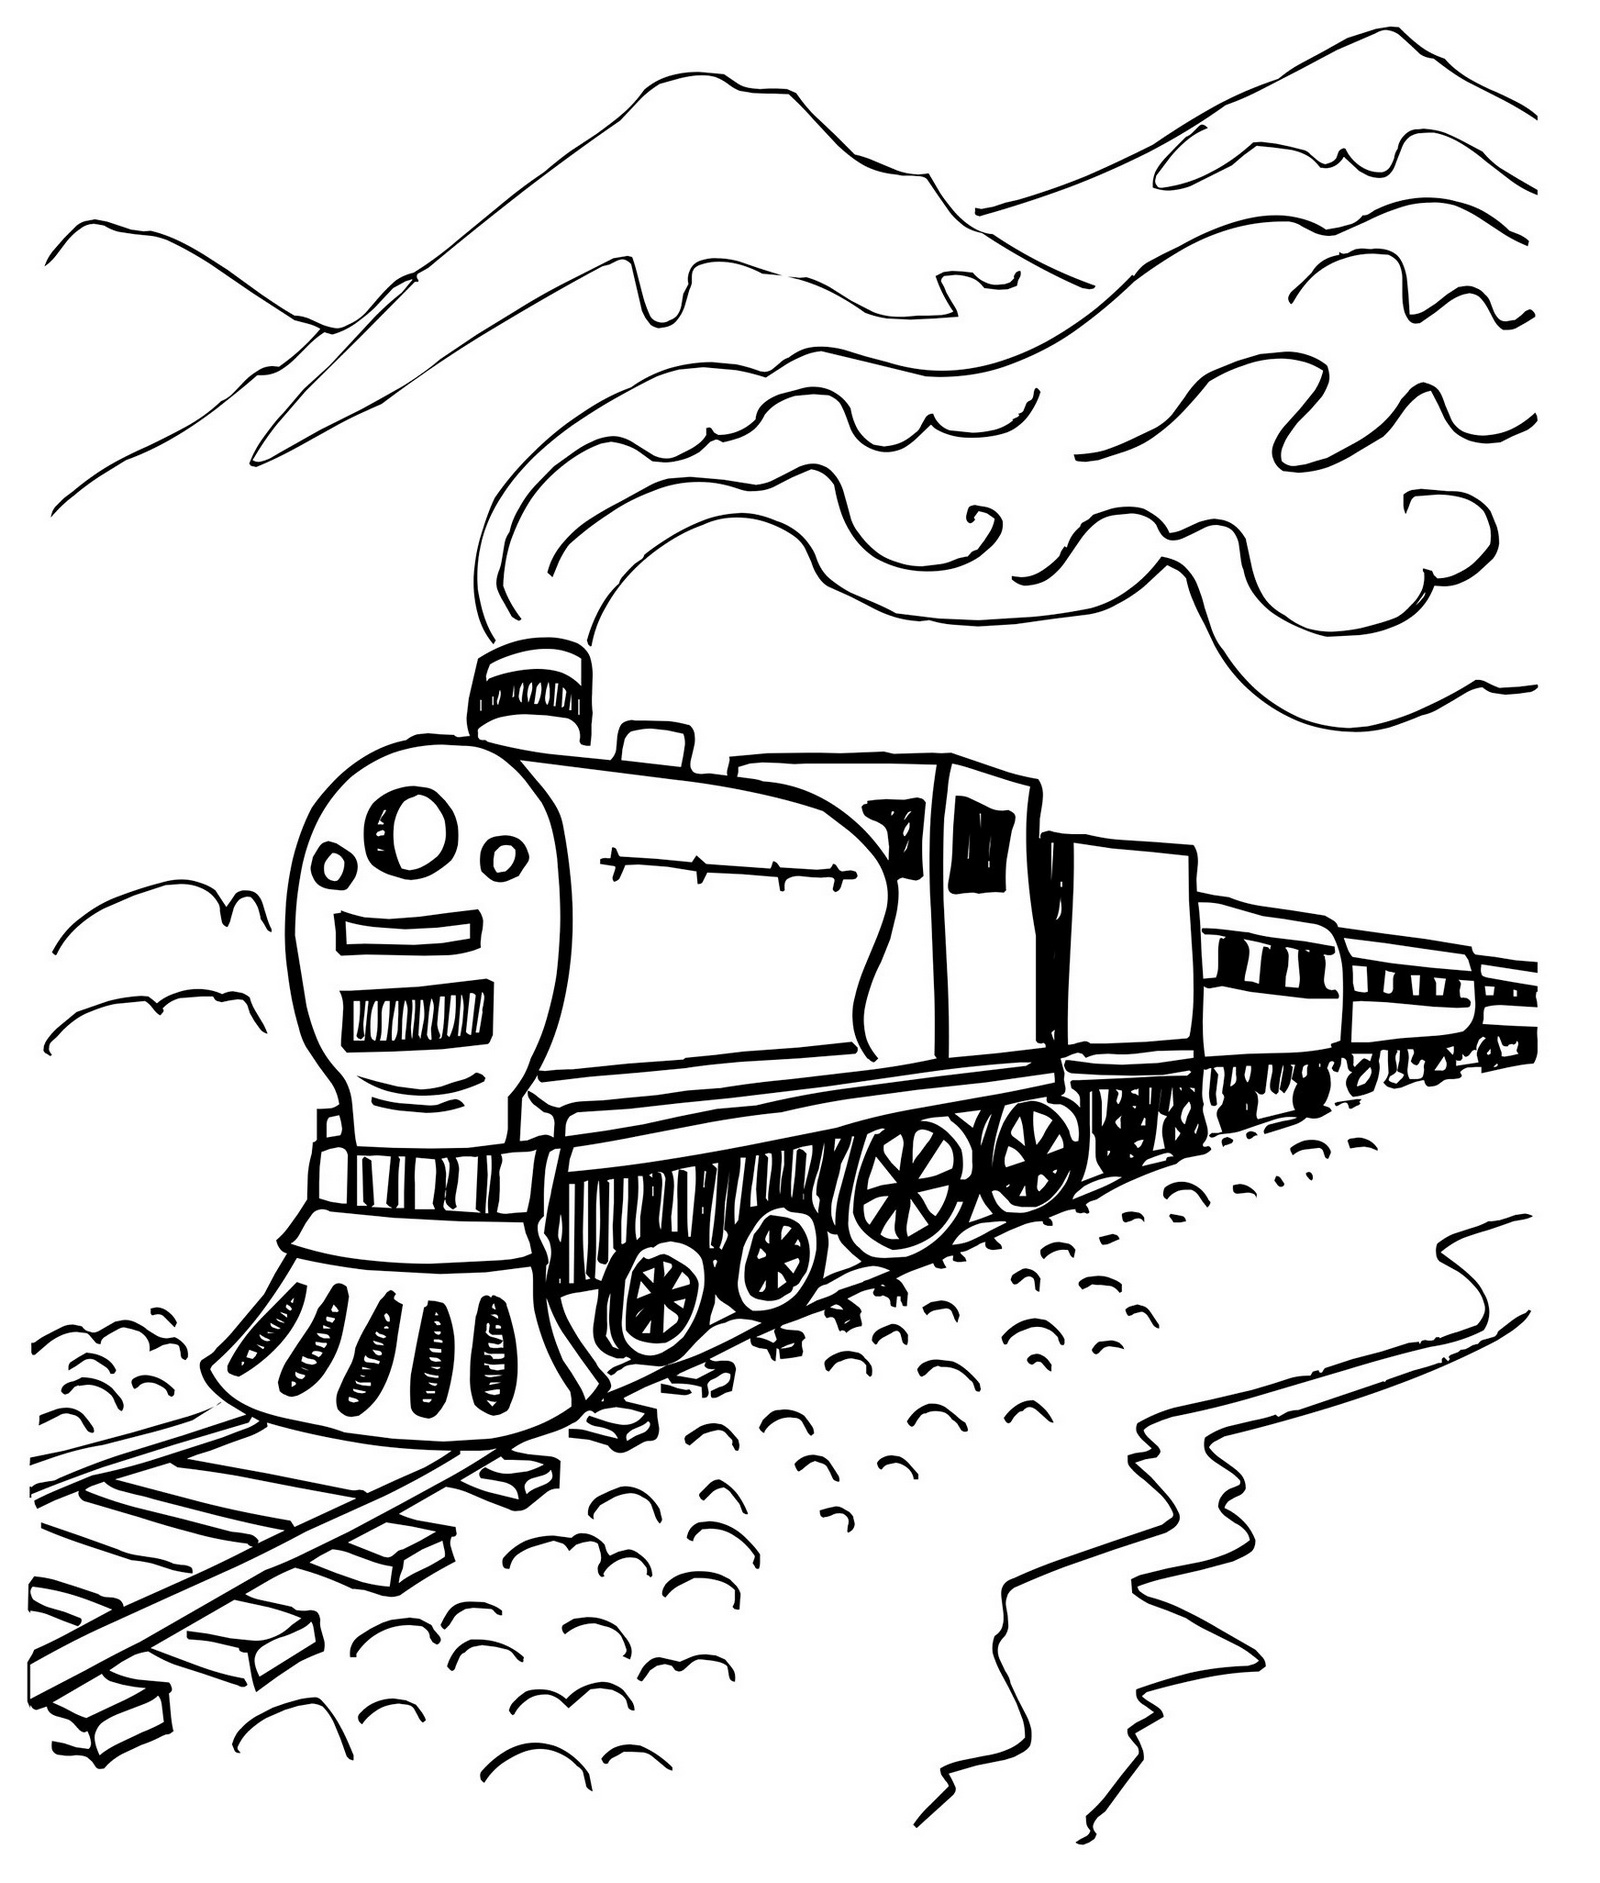 11-amazing-steam-train-coloring-pages-for-boys-coloring-pages